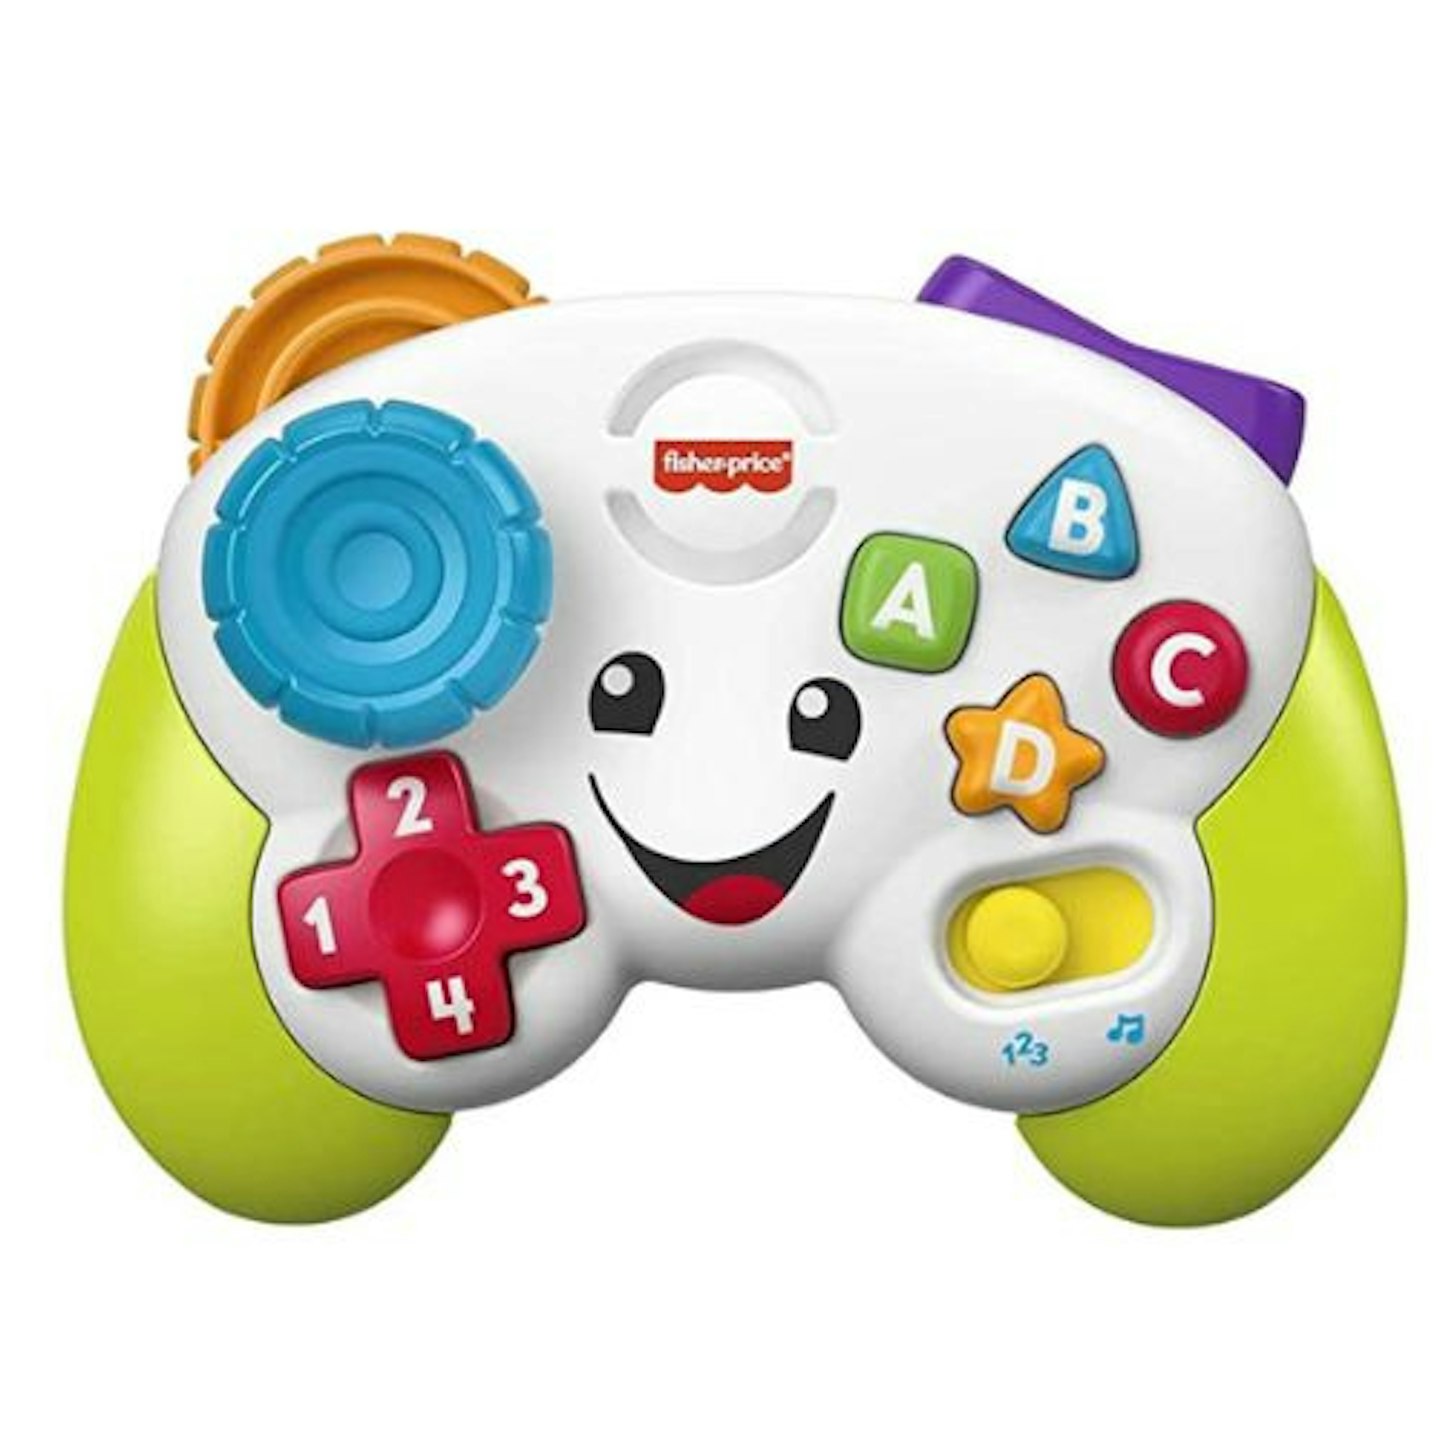 Fisher-Price-Game-and-Learn-Controller-1